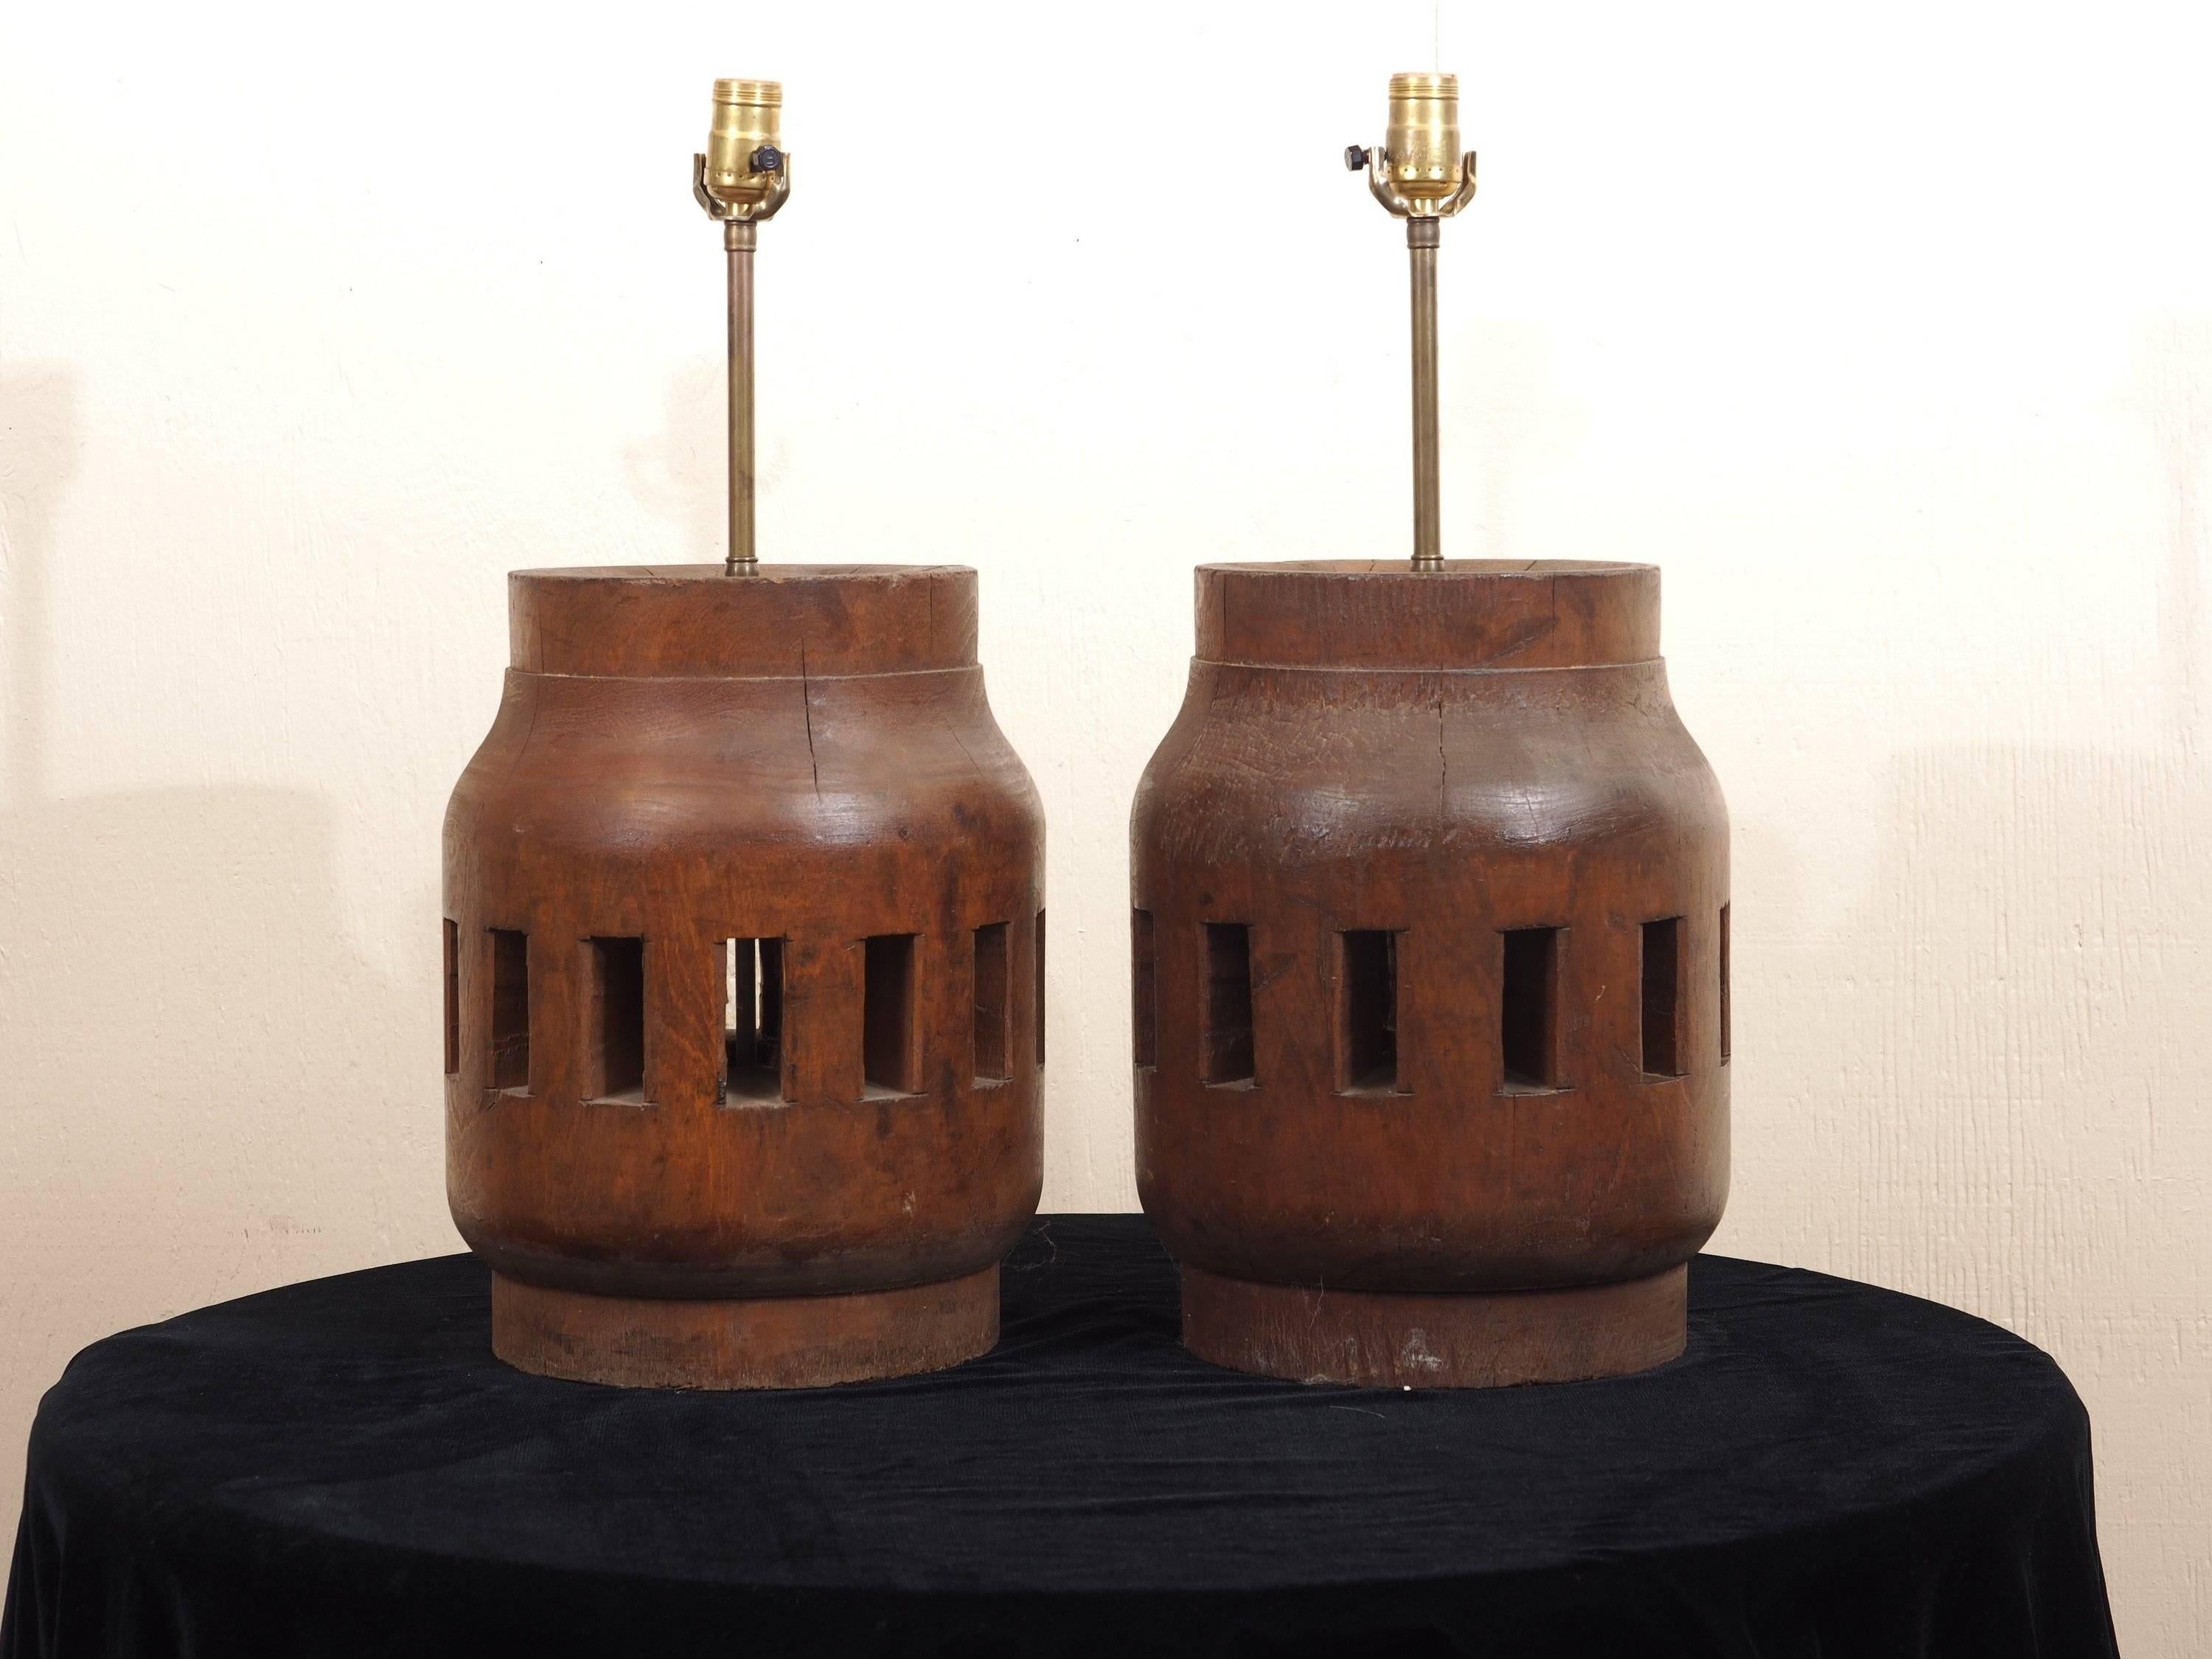 Antique wood barrel wheel hubs with elemental form and good weight, converted to lamps. Excellent age and use patina. There is some age appropriate splitting to the wood which does not detract.

 